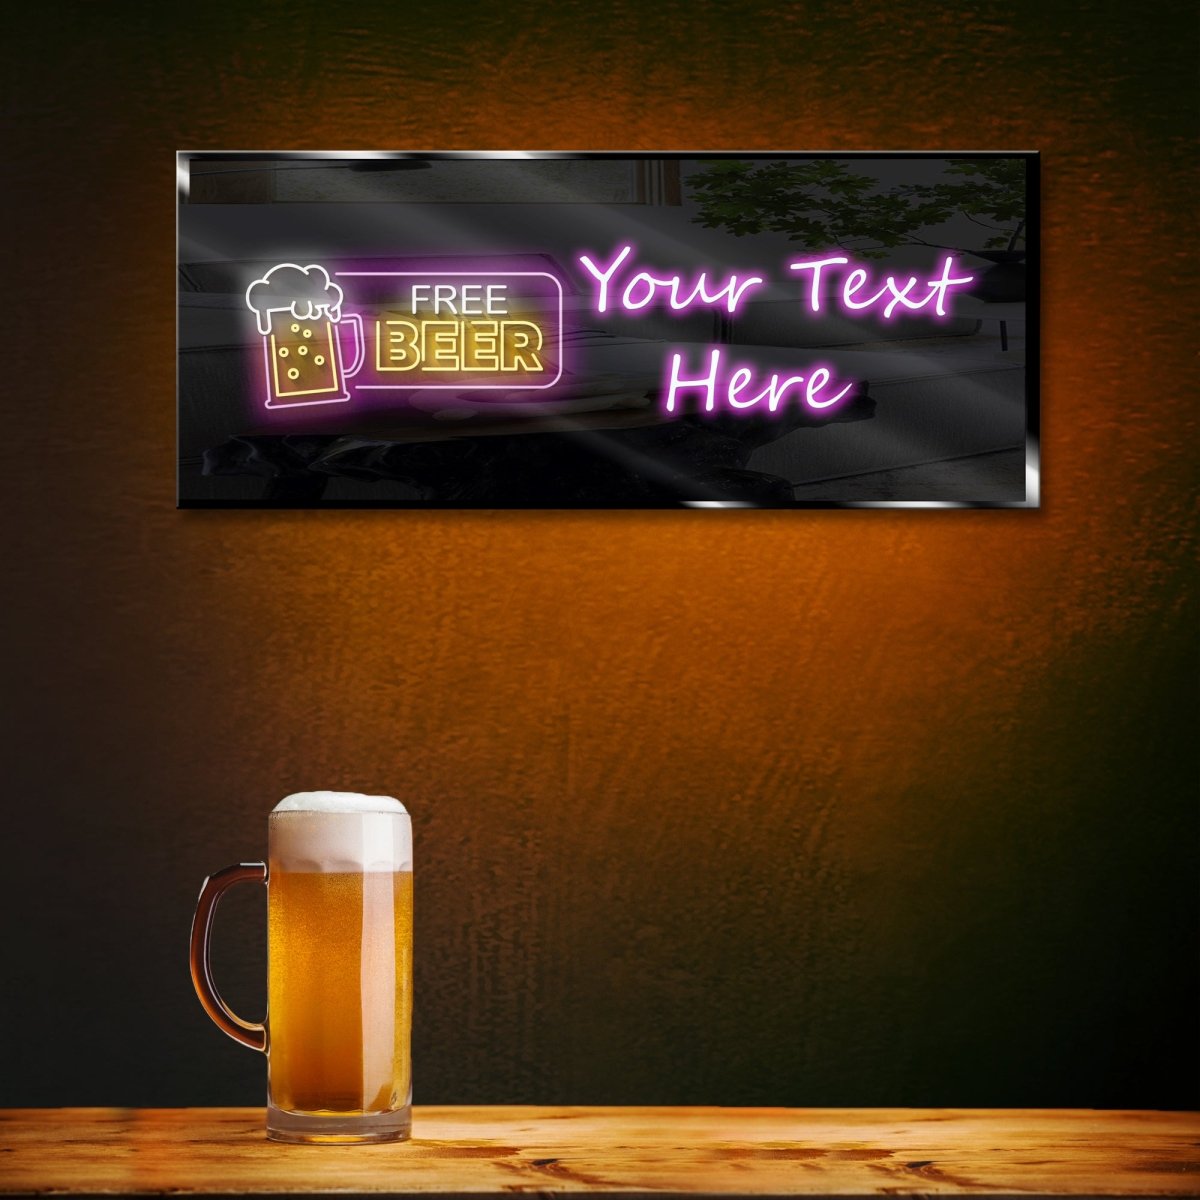 Personalized Neon Sign Free Beer - madaboutneon